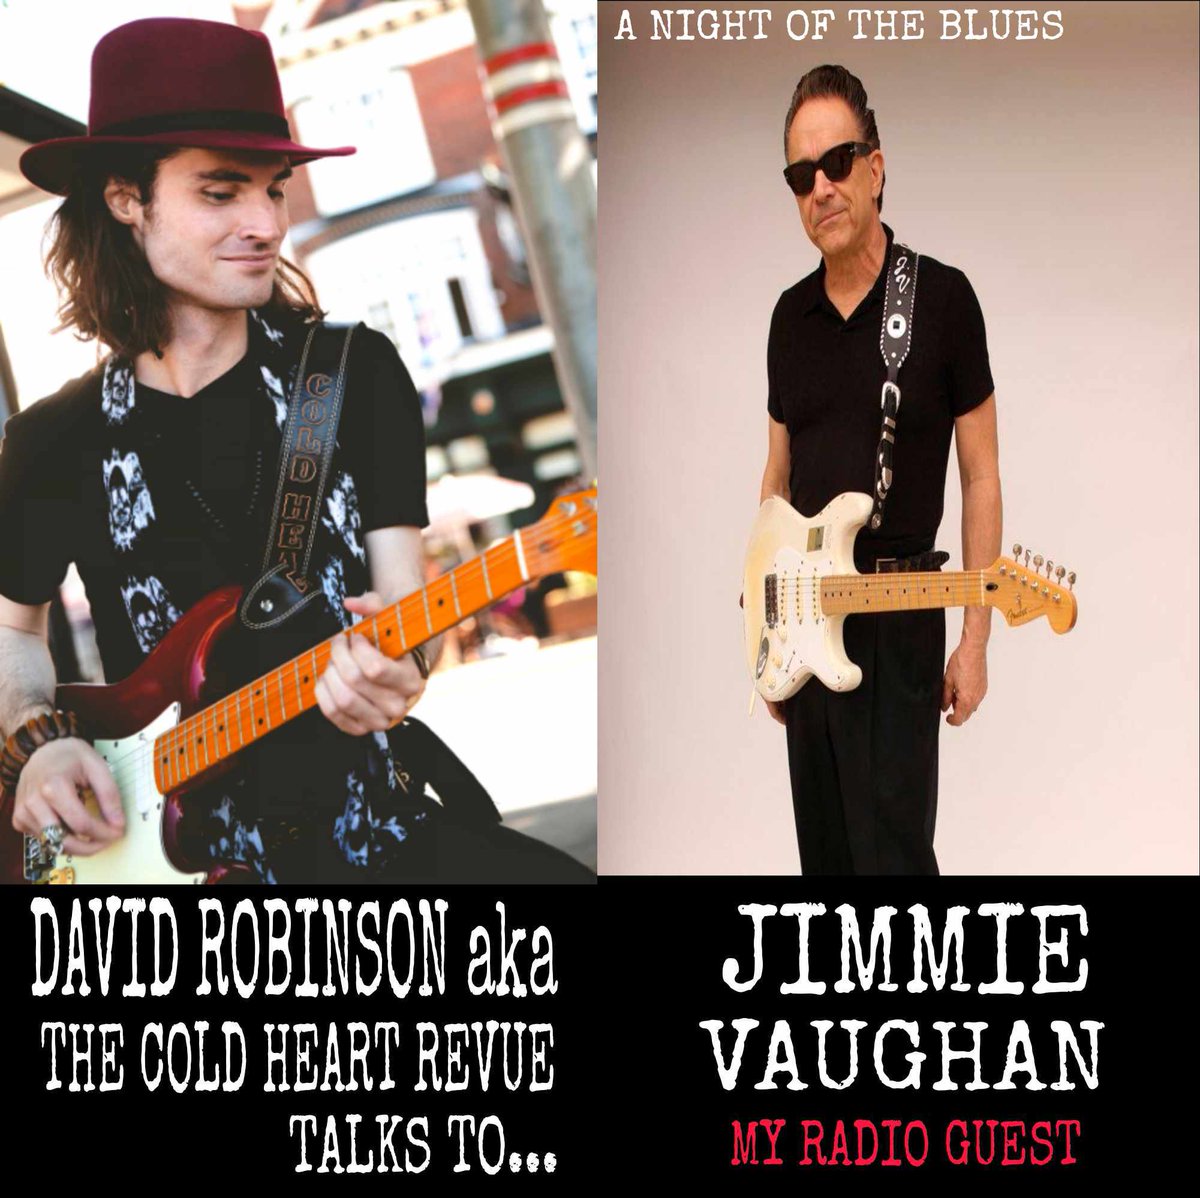 RADIO: my interview guest is @JimmieVaughan He helps me celebrate the 70th anniversary of the #Fender #Stratocaster David Robinson aka @coldheartrevue A Night of the Blues #music from Jeff Beck, Jimi Hendrix, Eric Clapton, Buddy Guy, Buddy Holly + Brave Rival #guitar #blues